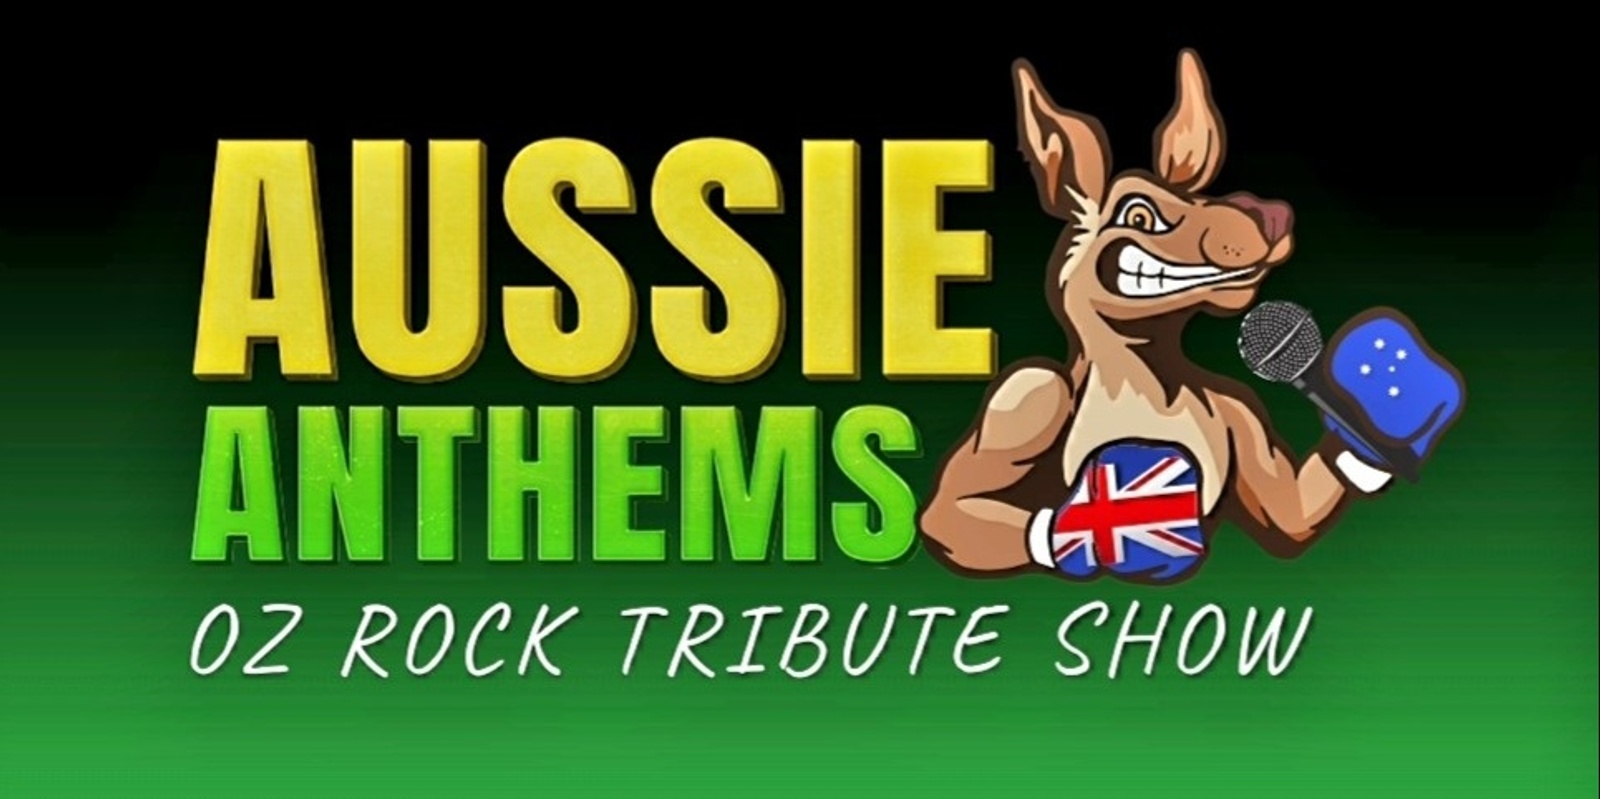 Banner image for Aussie Anthems Oz Rock Tribute Show